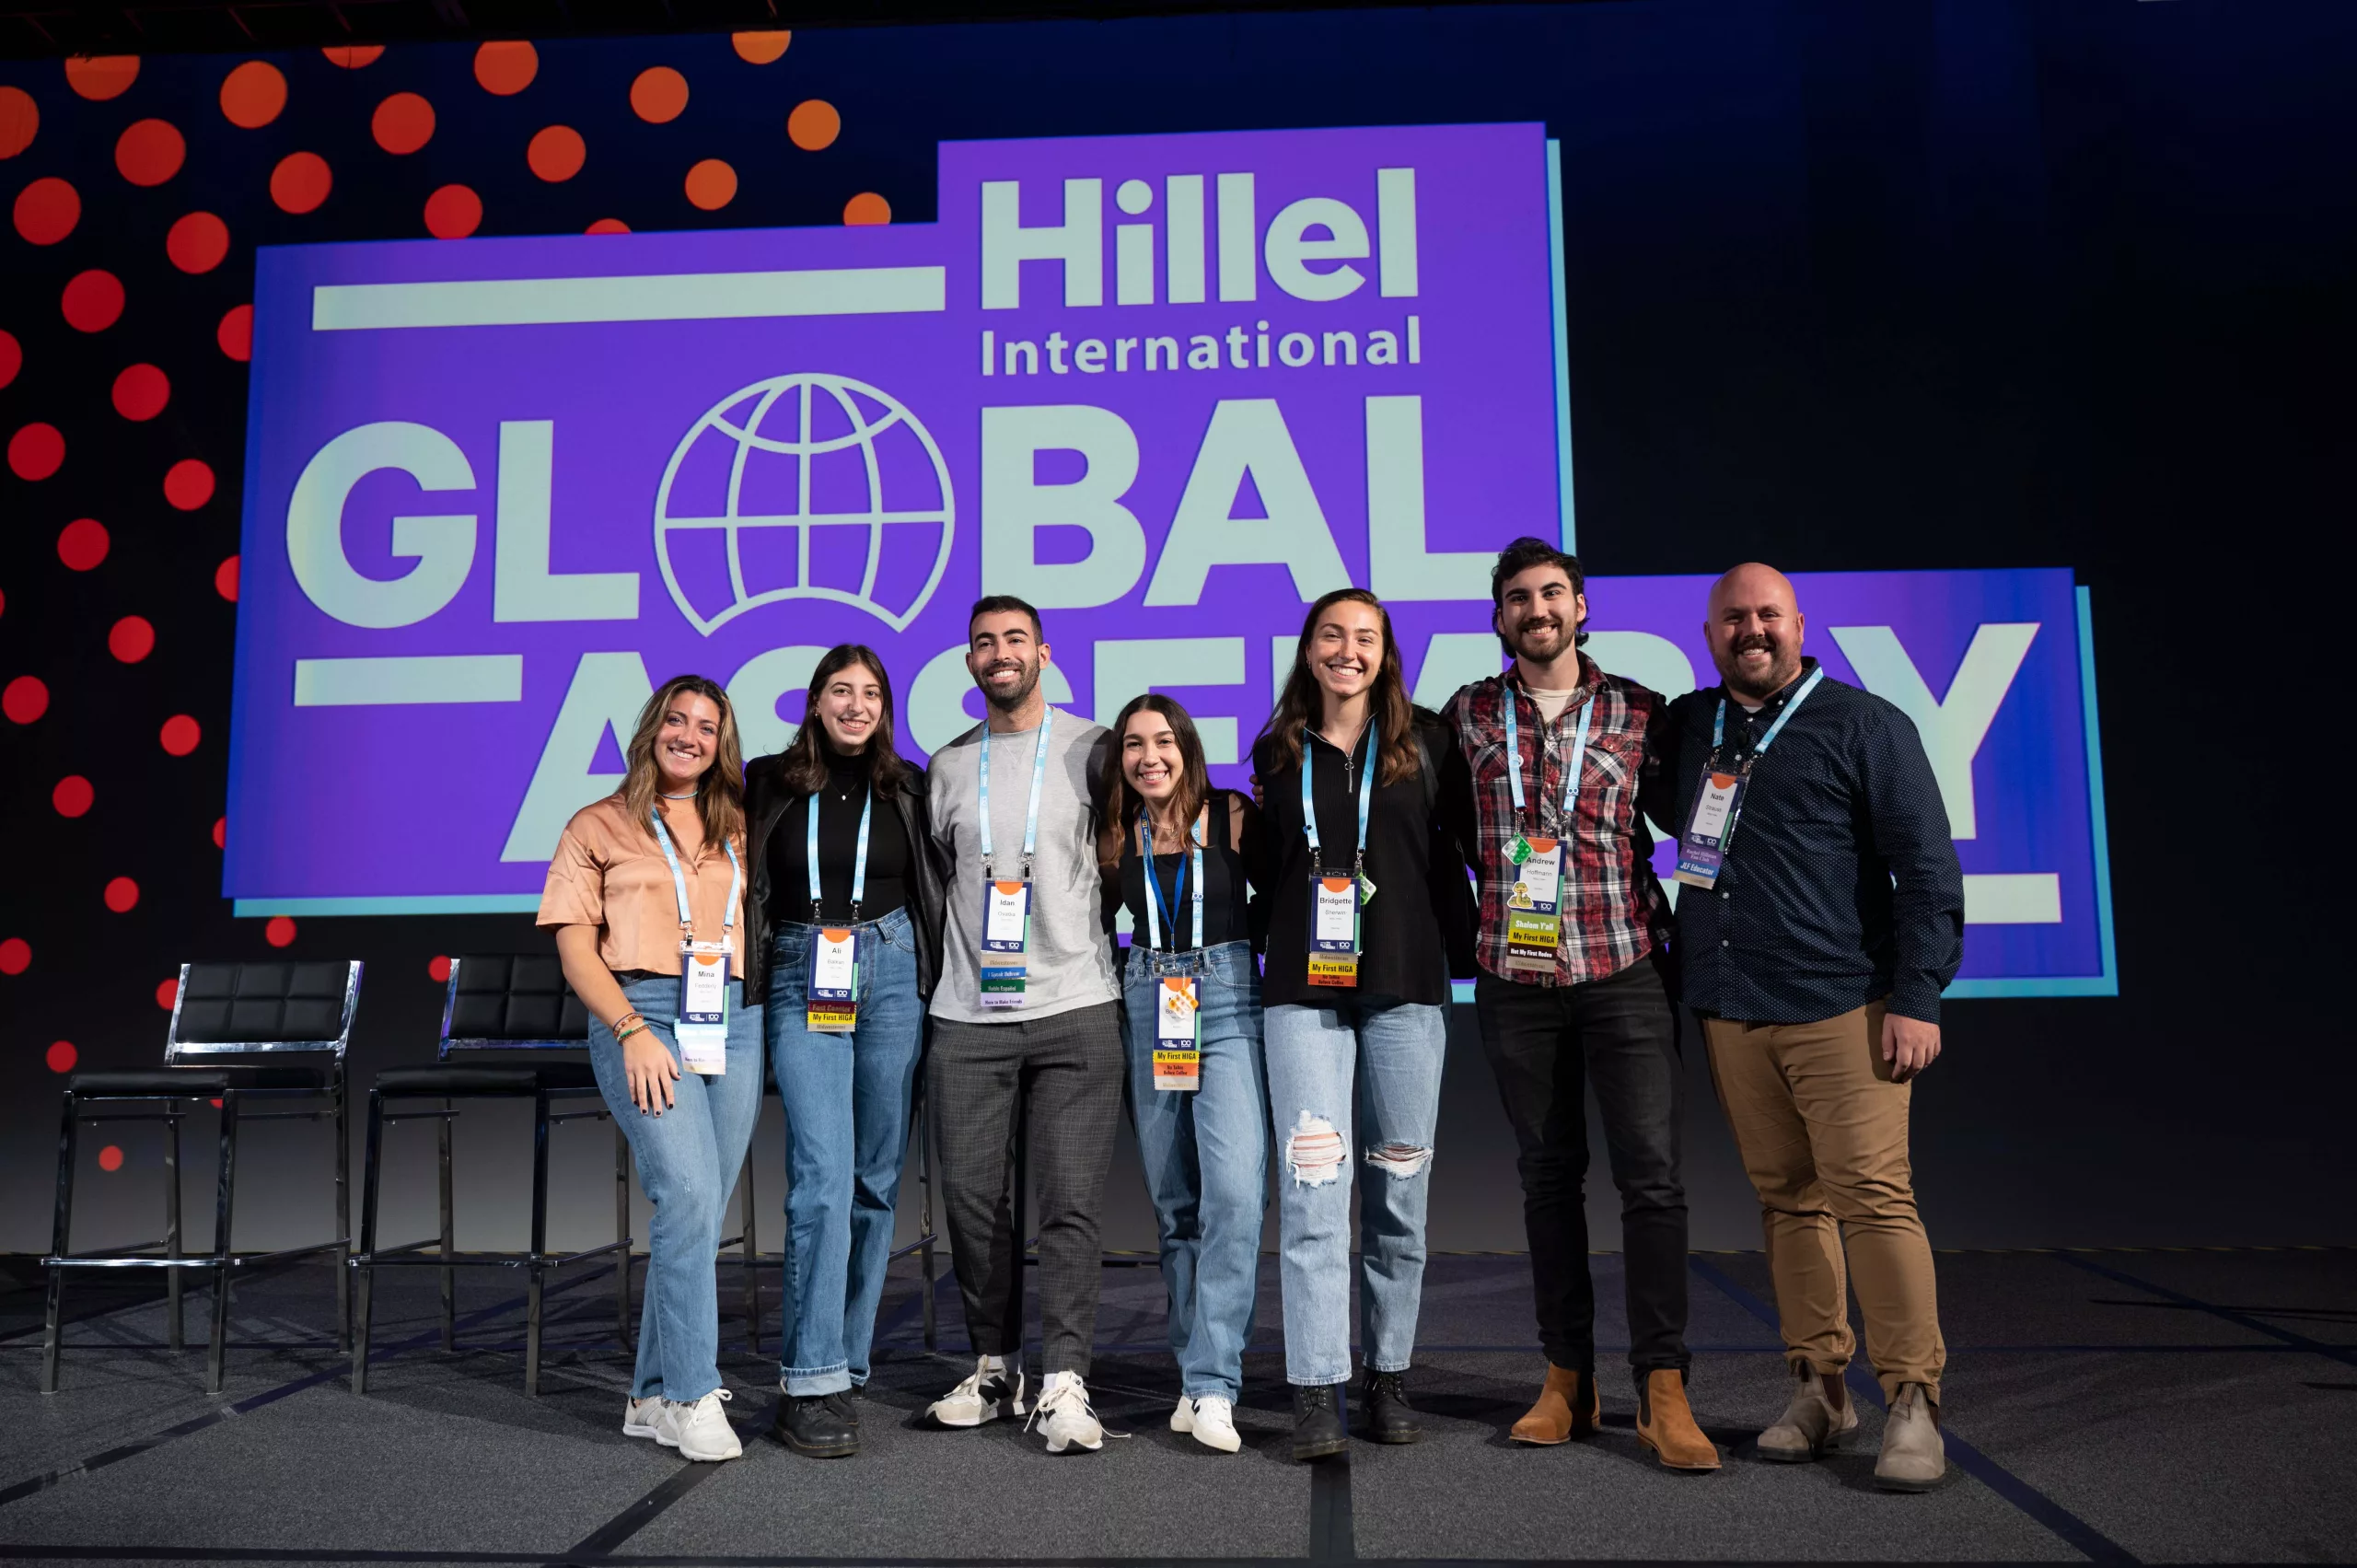 Top 10 Moments from the First 24 Hours of Hillel International’s Global